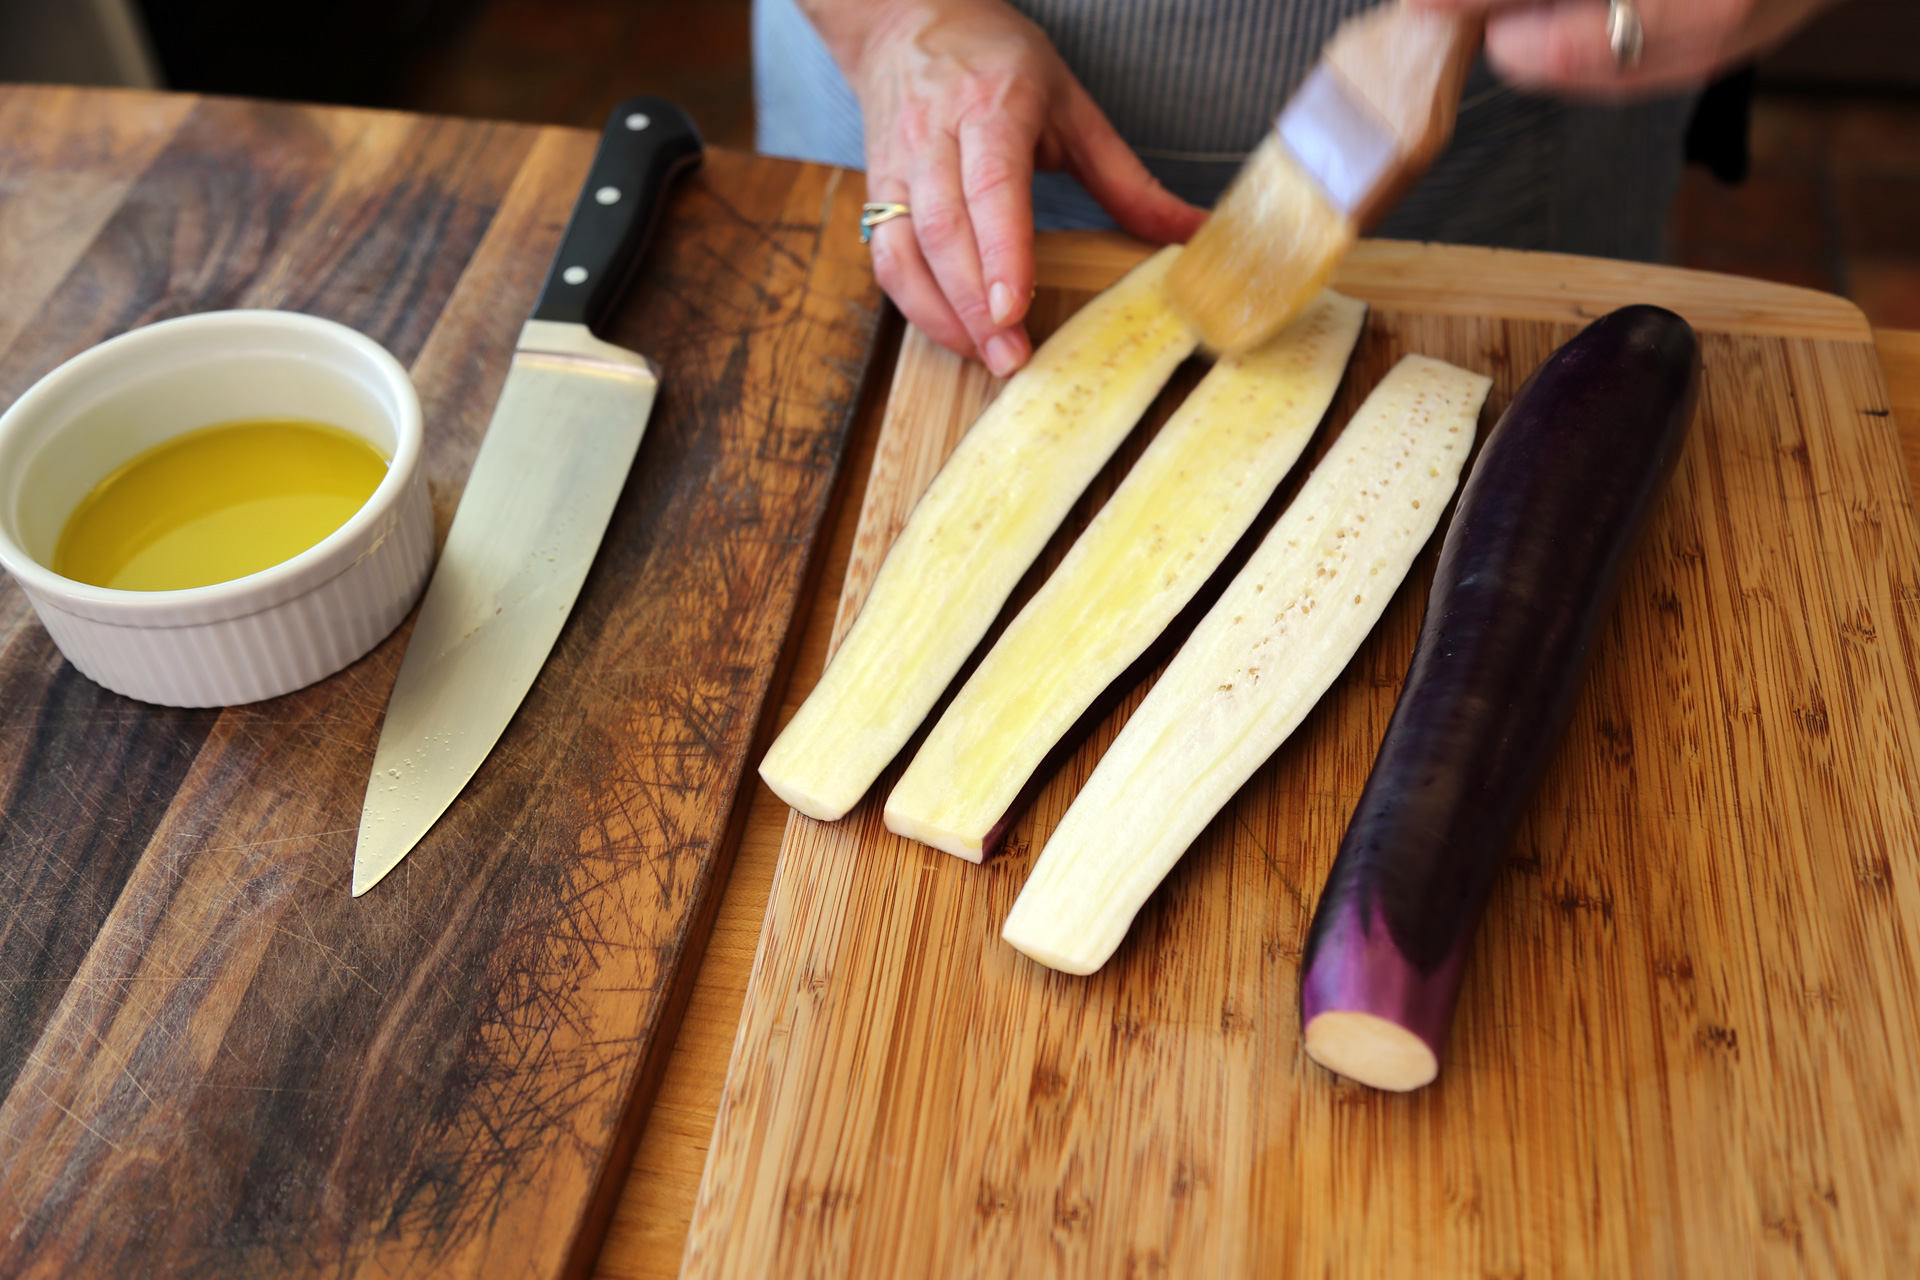 Trim the eggplant and slice it lengthwise into 1/2-inch pieces. Brush it with olive oil.